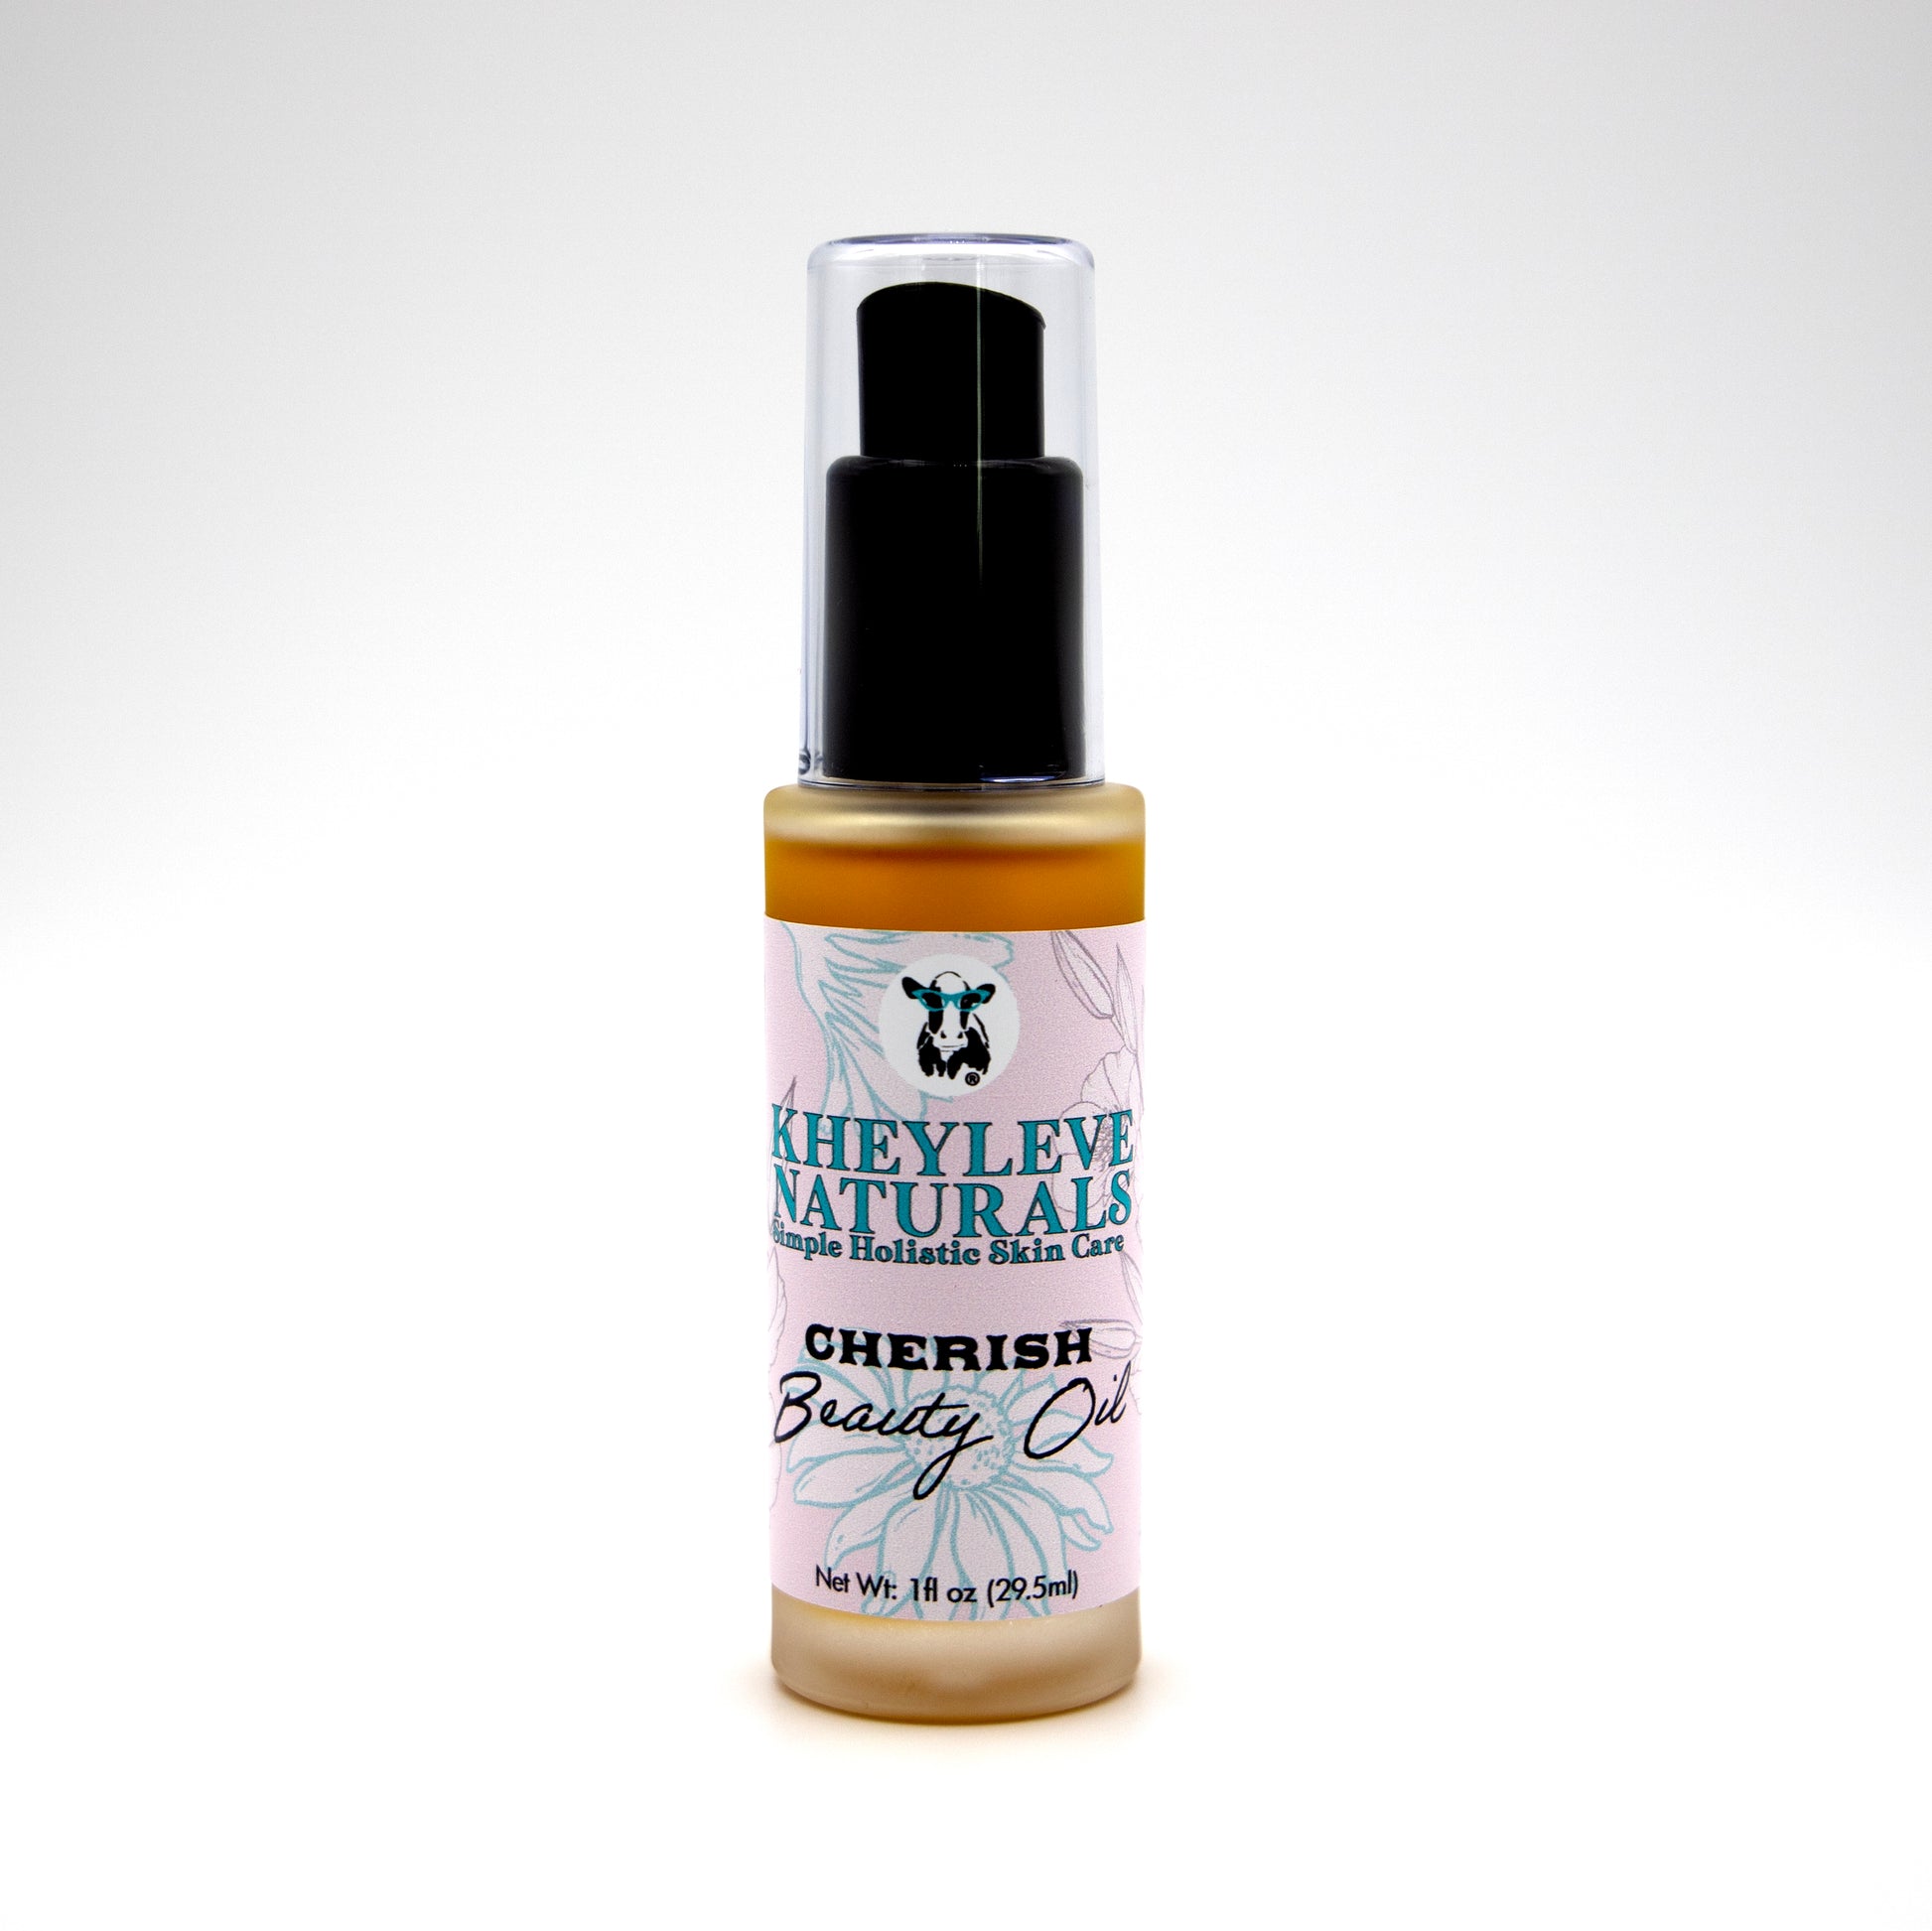 This luxurious oil will nourish, hydrate, and revitalize your skin, leaving you with a radiant and youthful glow.